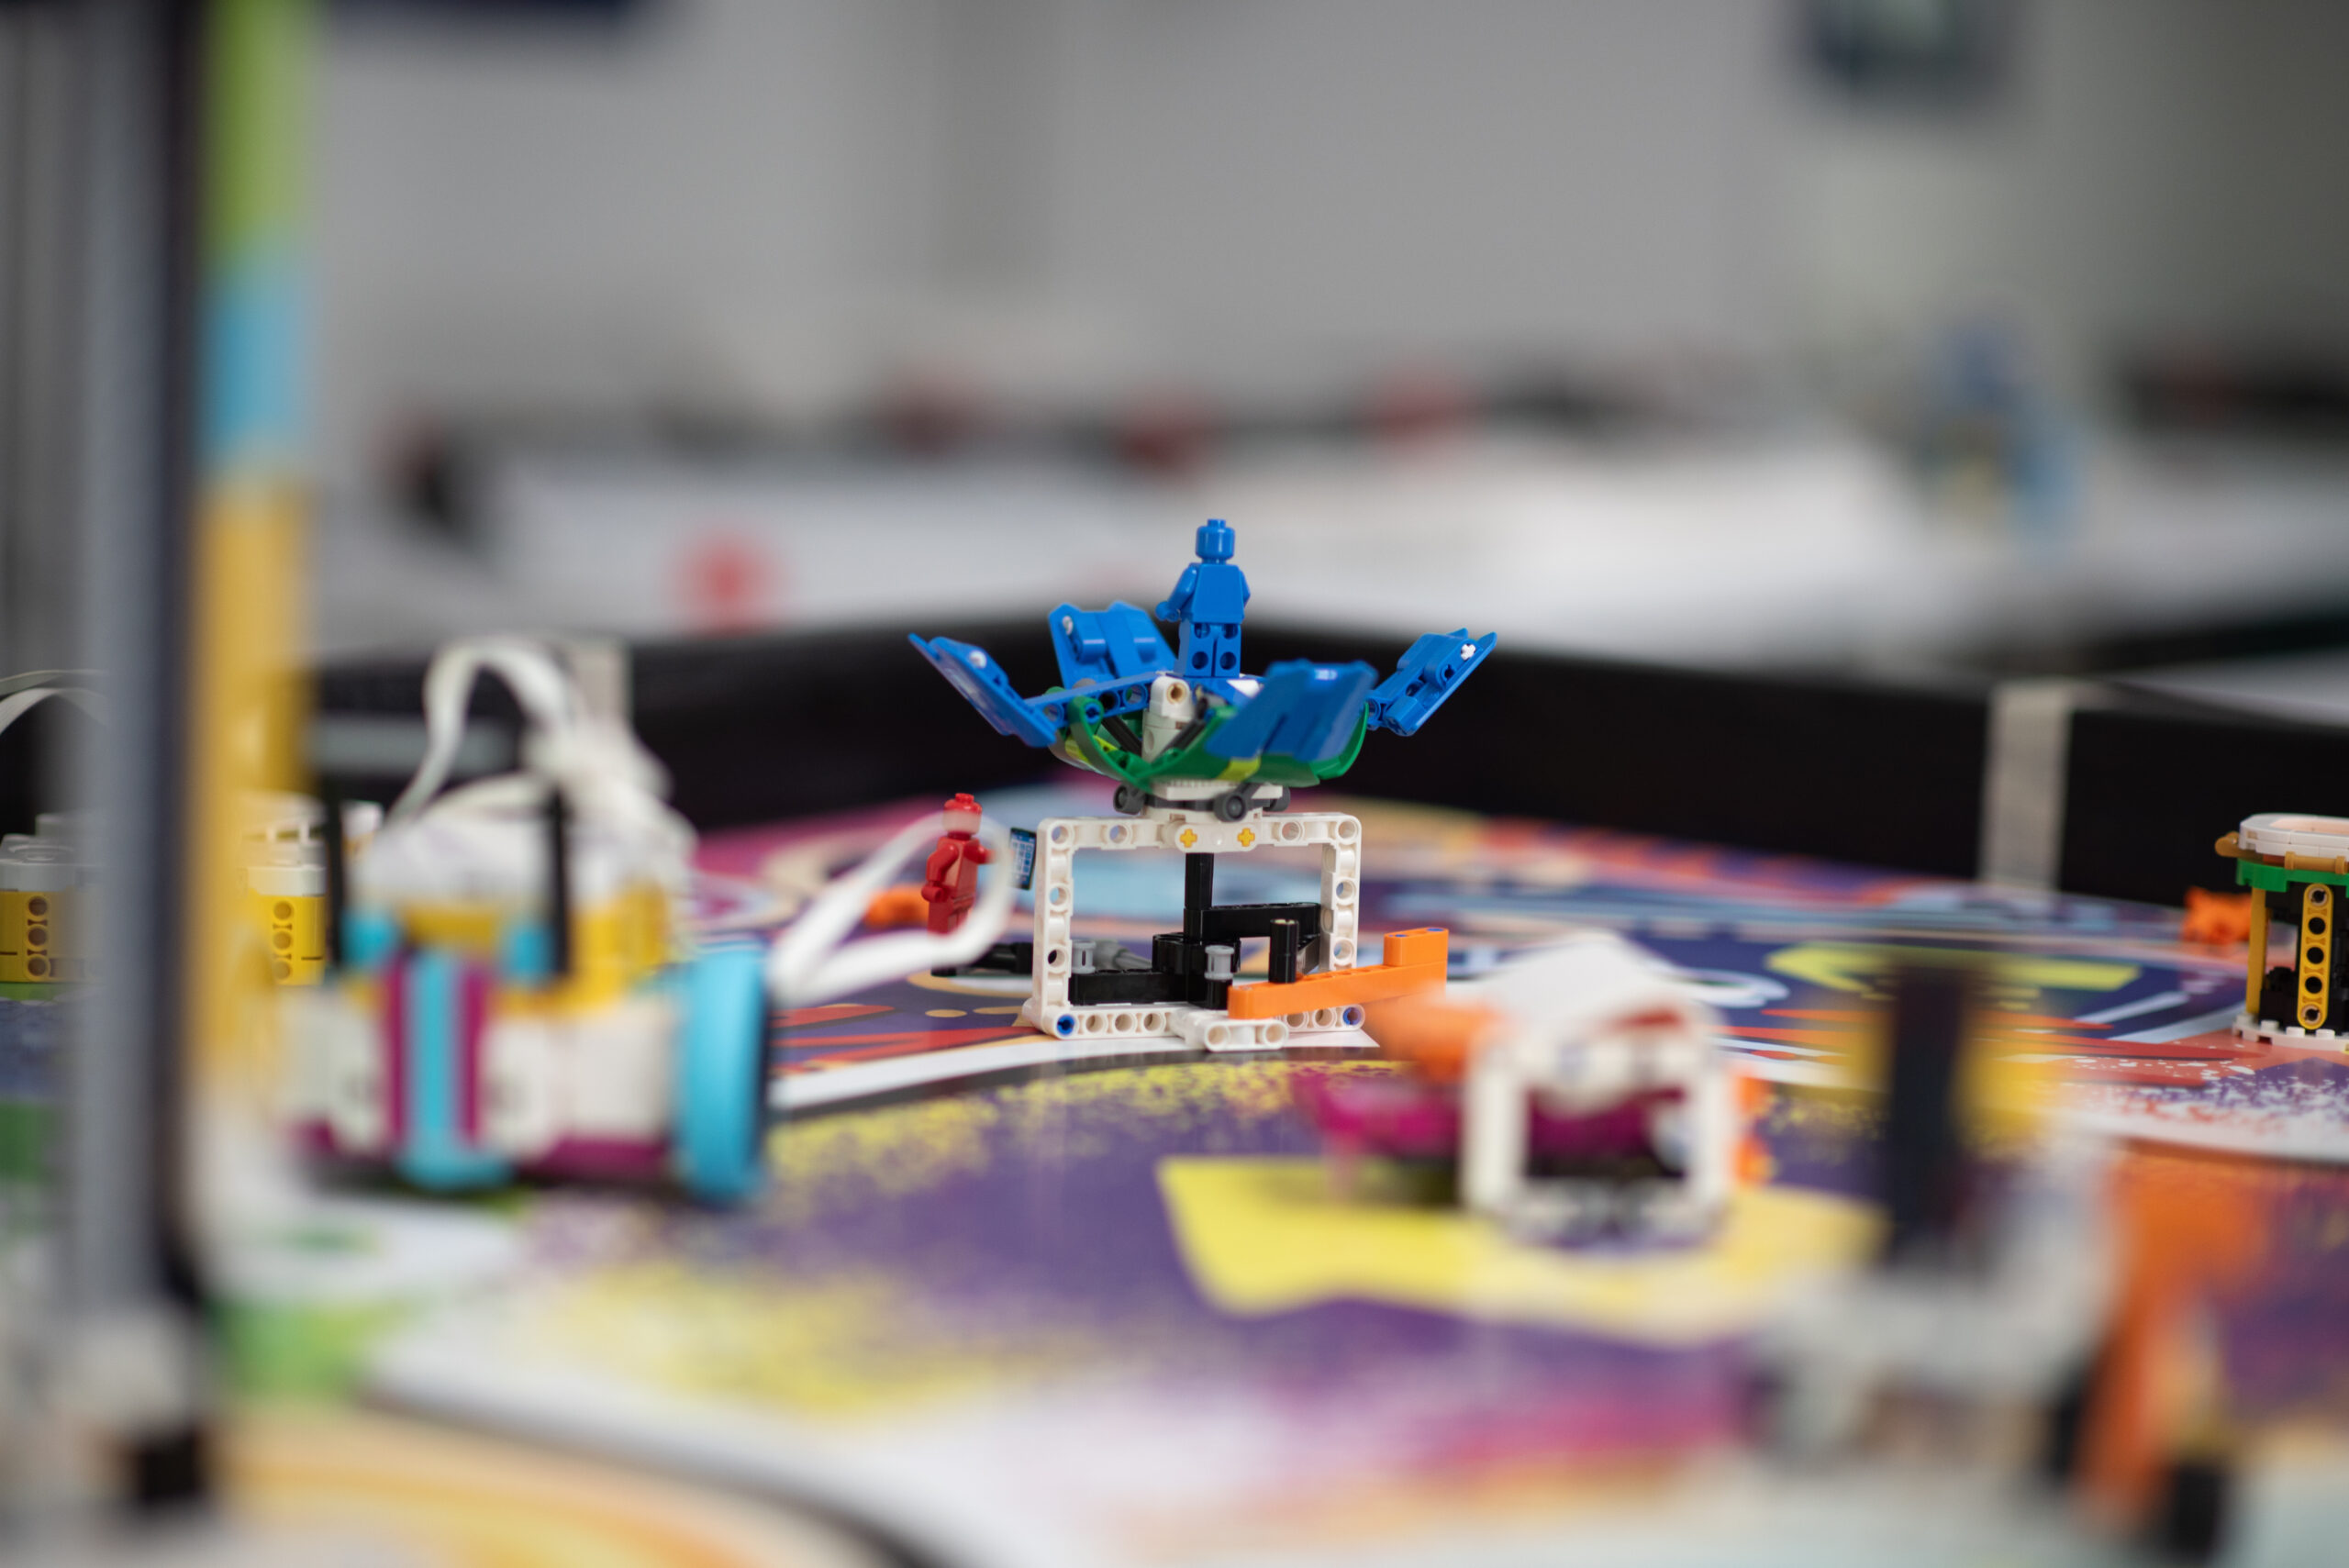 The MASTERPIECE Season - FIRST LEGO League an educational STEM Programm for  everybody between 4 and 16